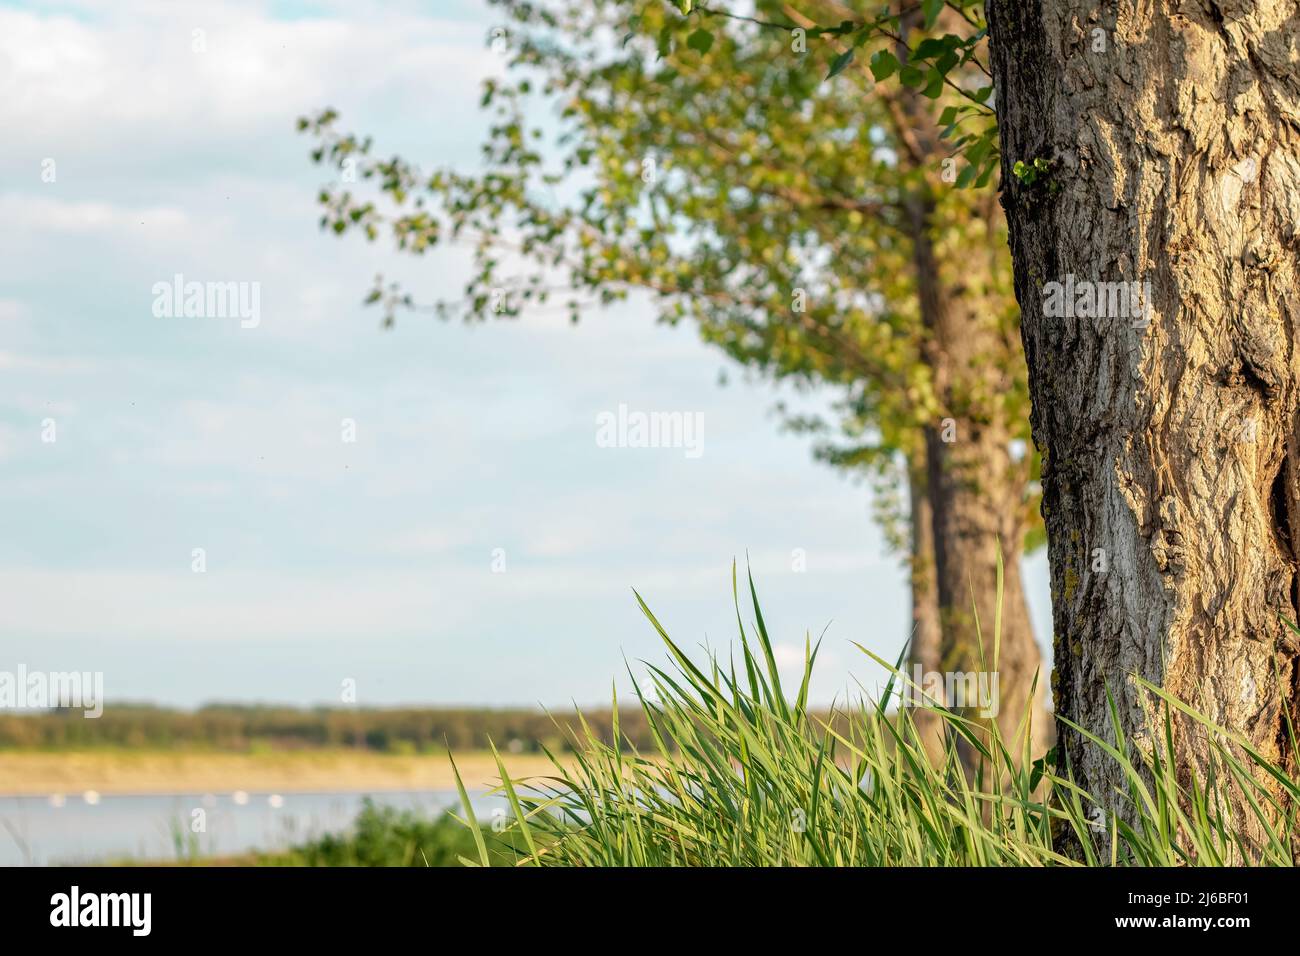 Promenade along the river. A close up at the tree and grass. Stock Photo